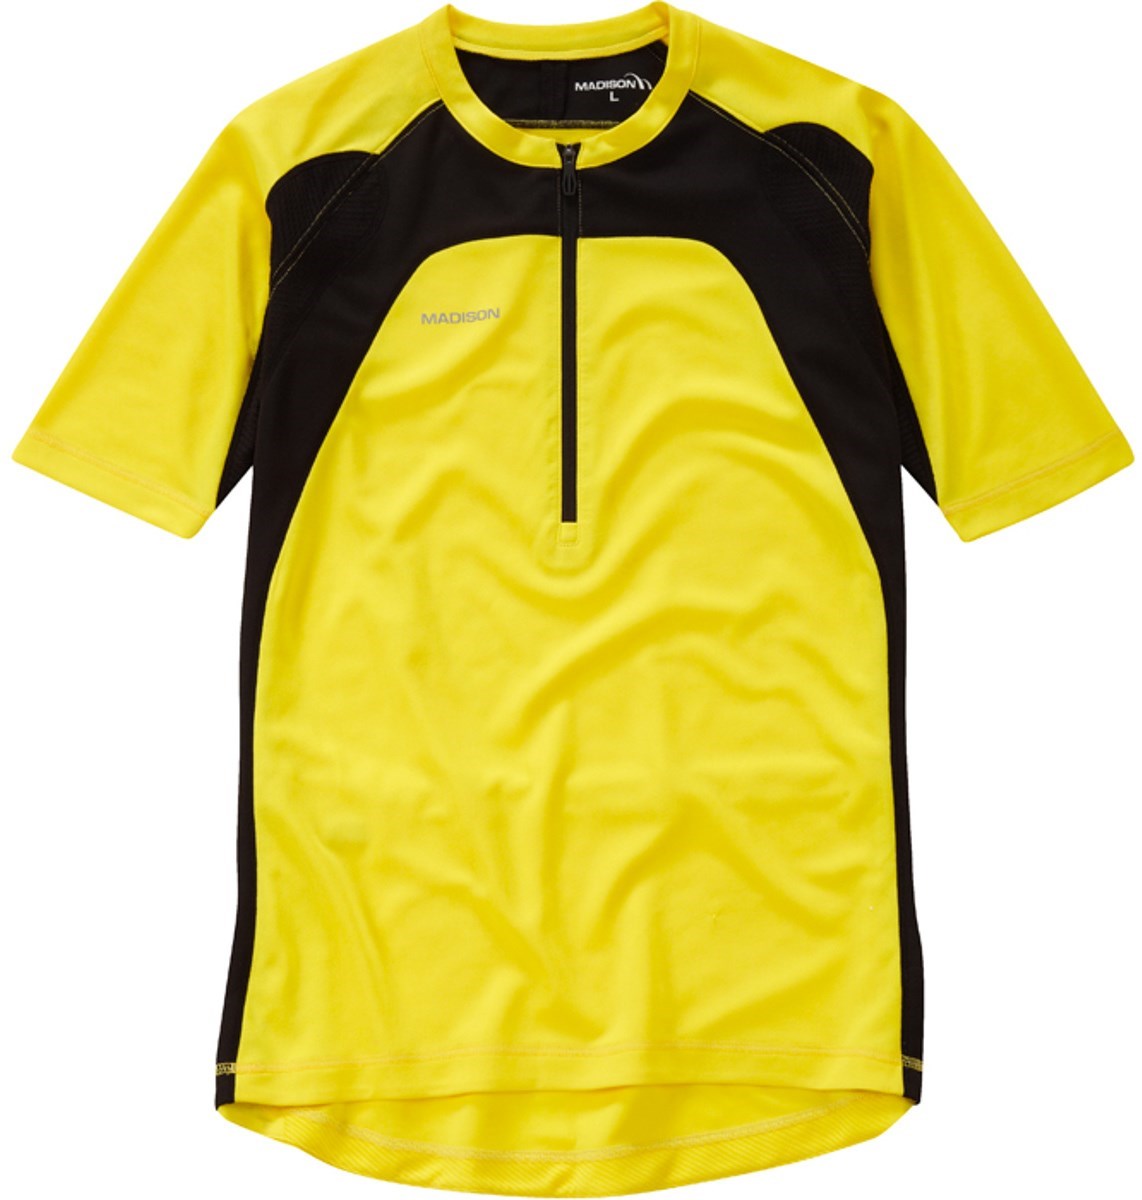 Madison Club Short Sleeve Cycling Jersey product image